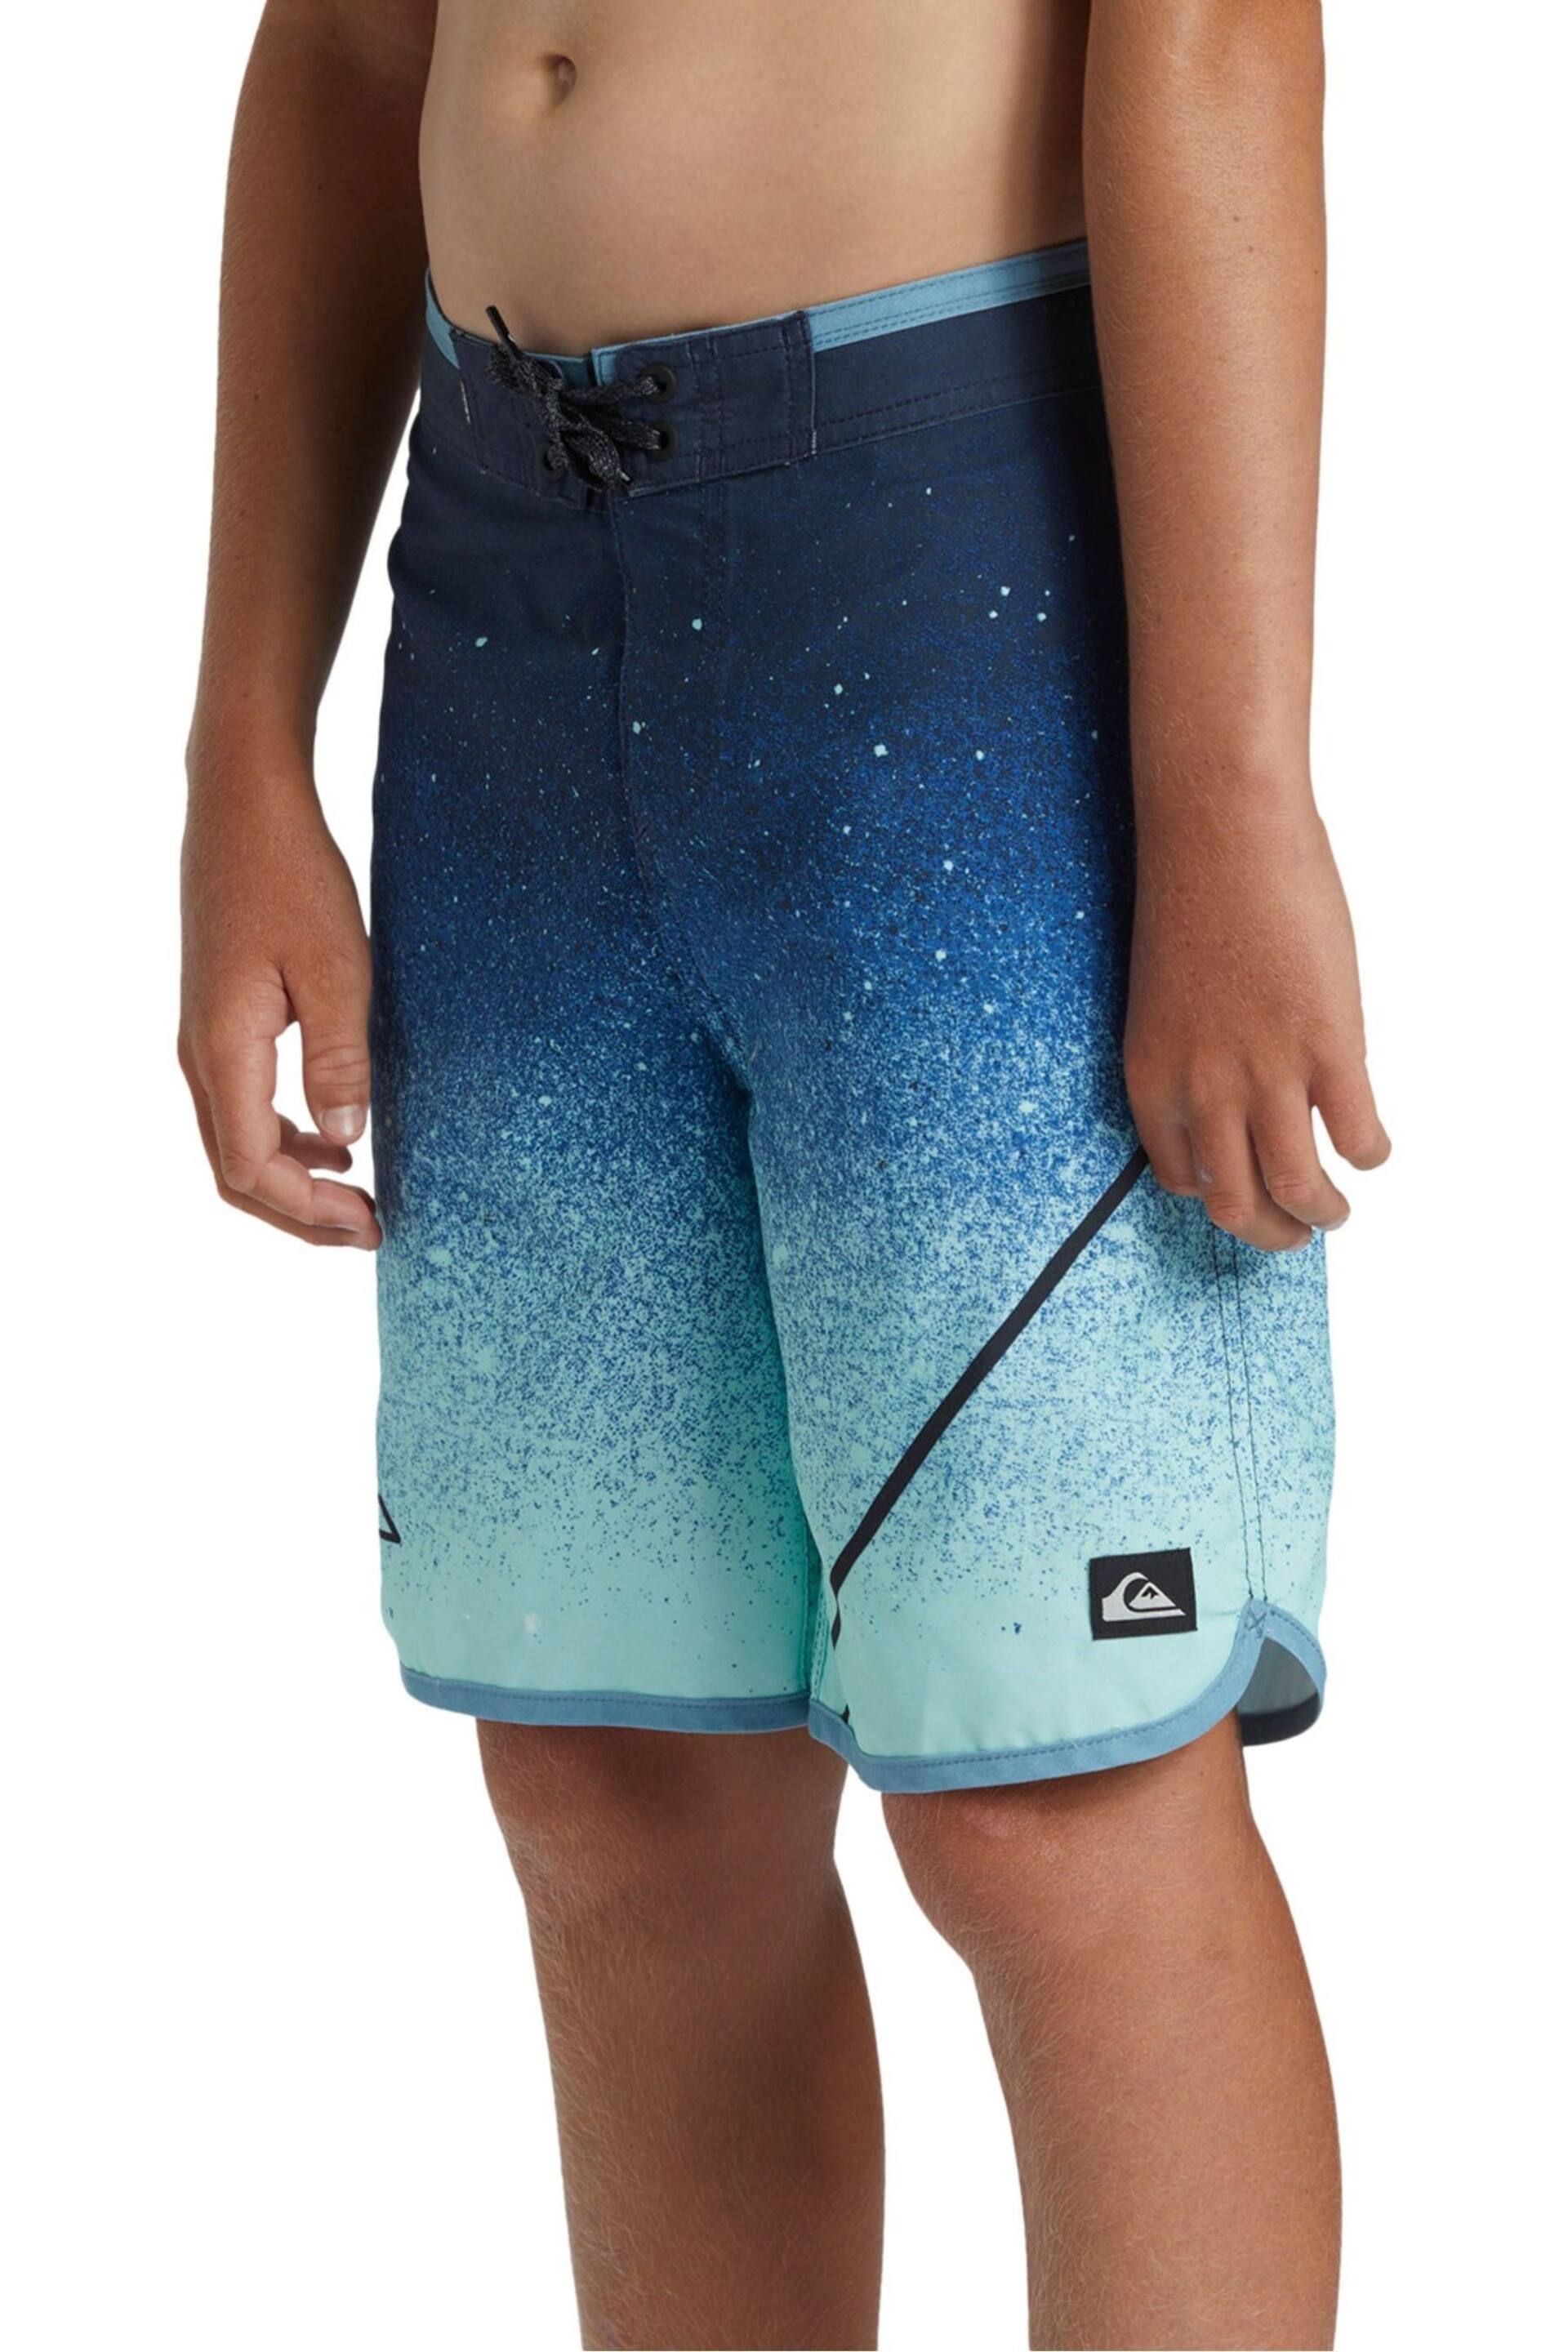 Quiksilver Boys Blue Youth Ombre Surfsilk Swim Shorts - Image 4 of 7